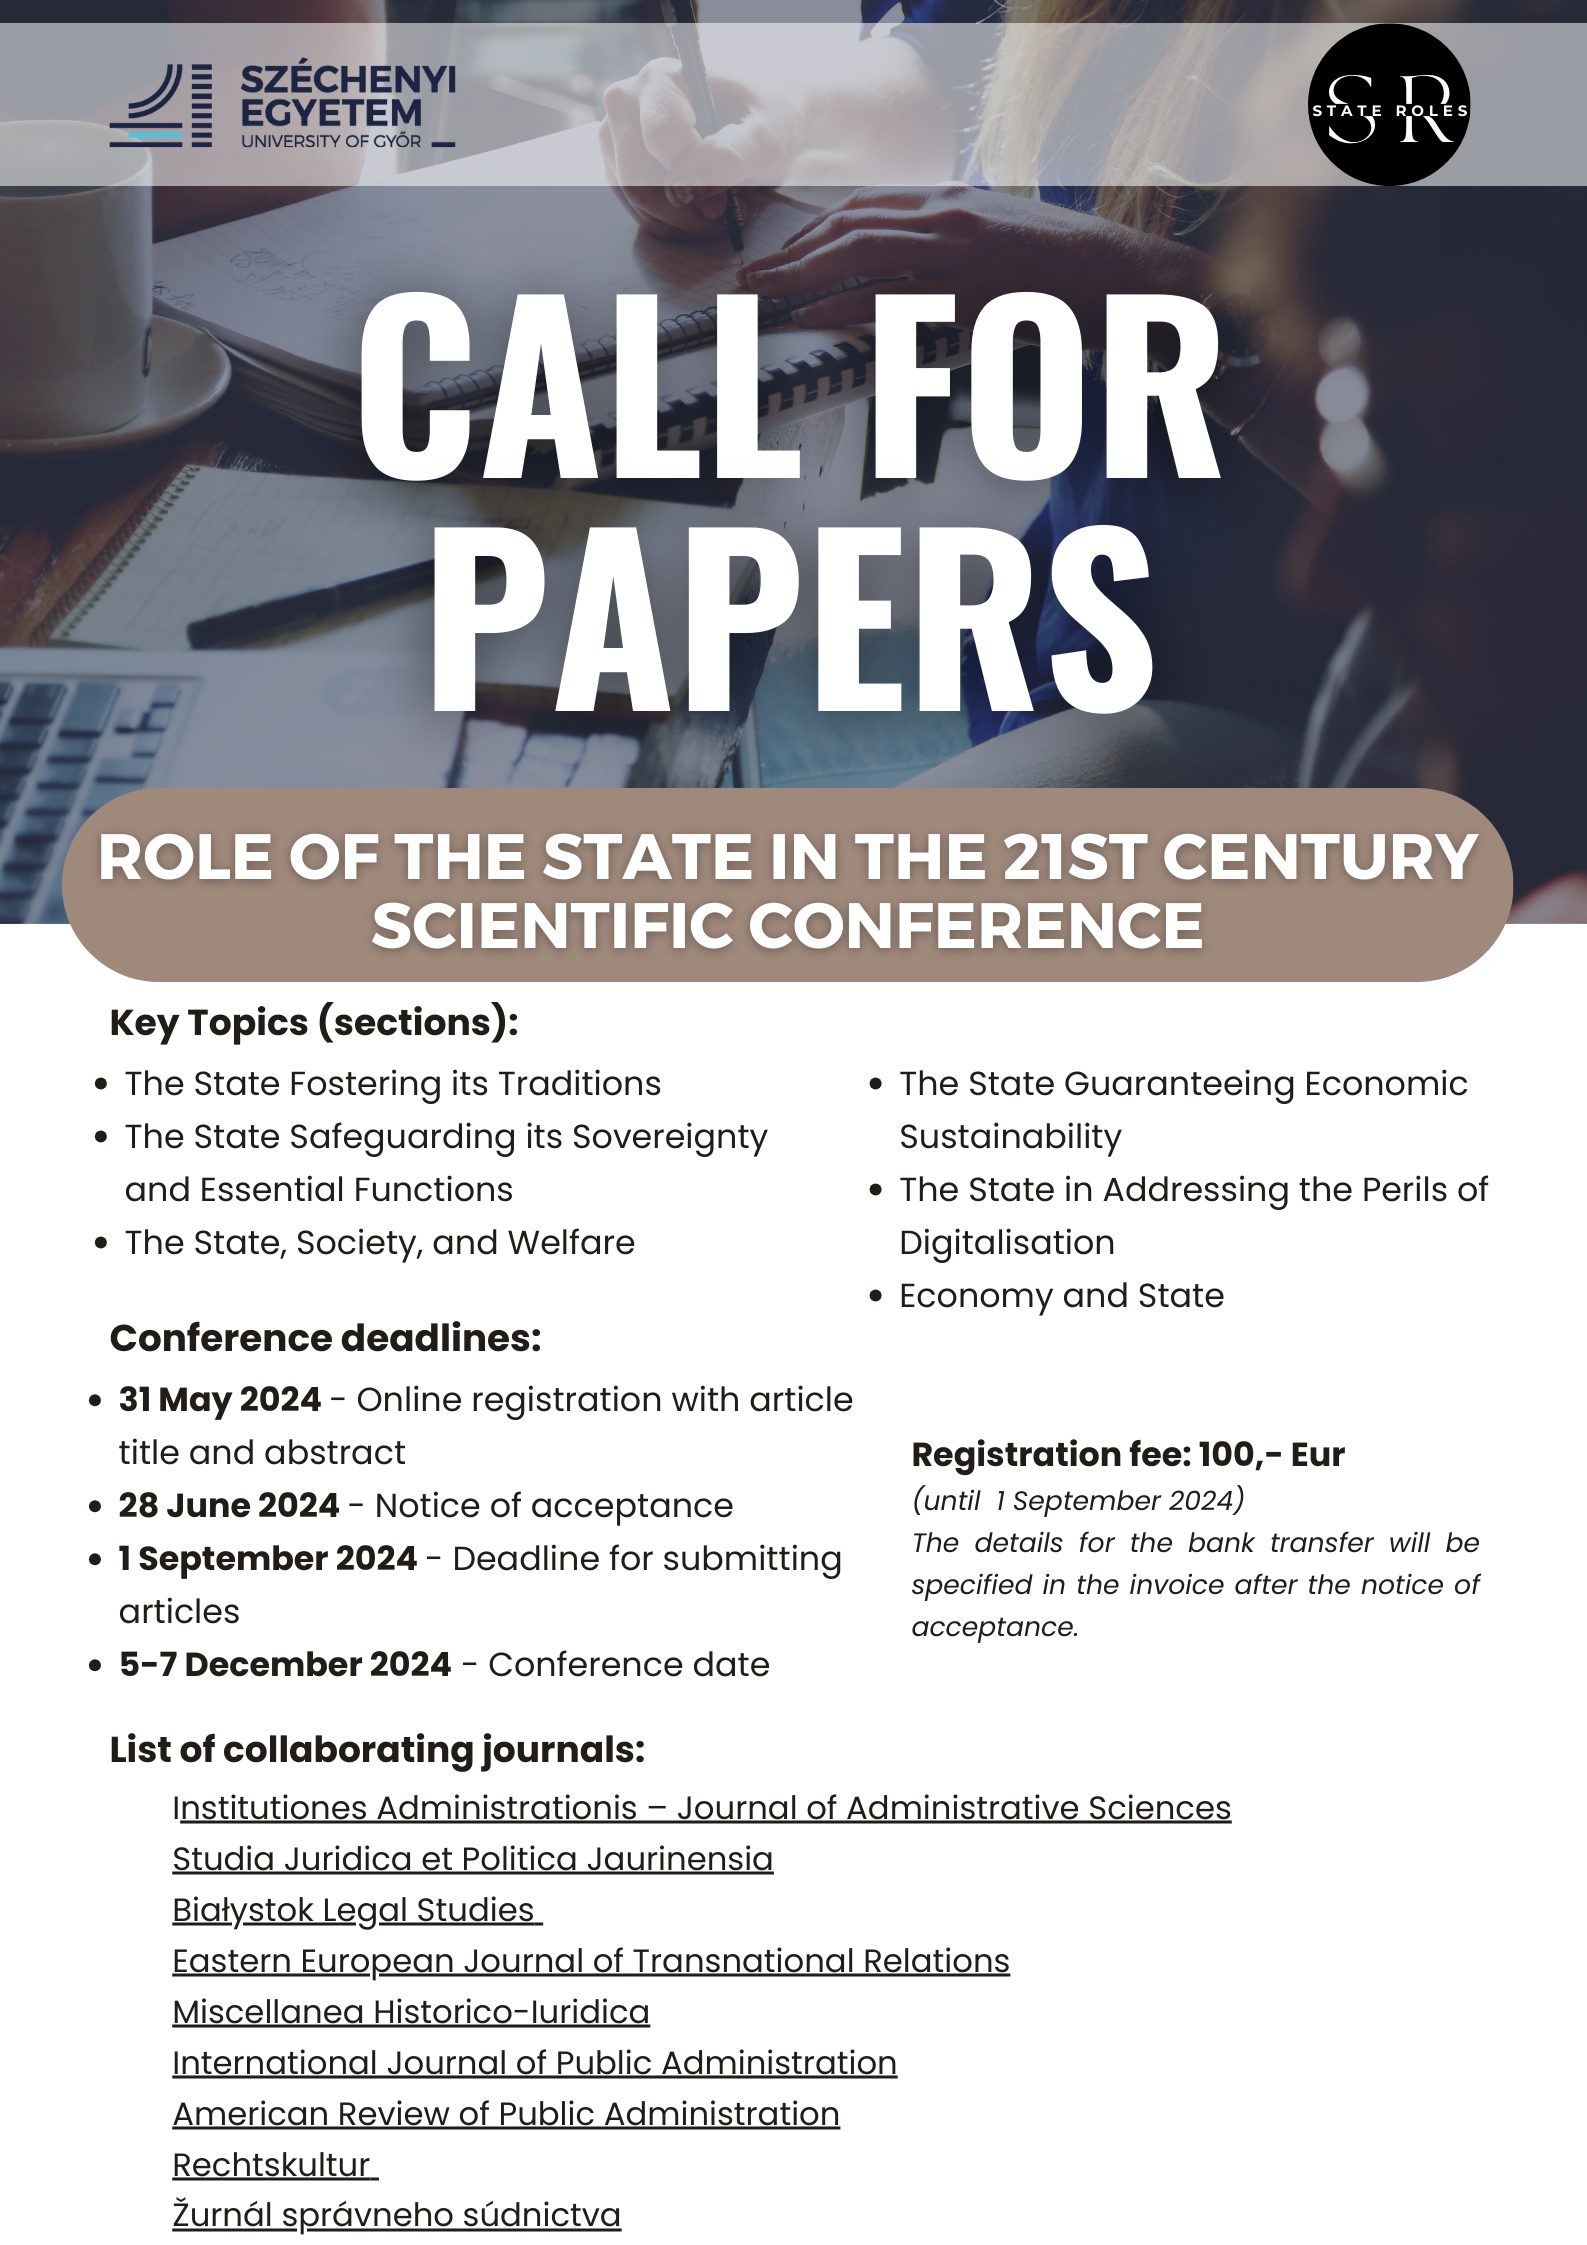 Call for papers - DFK SAMPLE (2).png